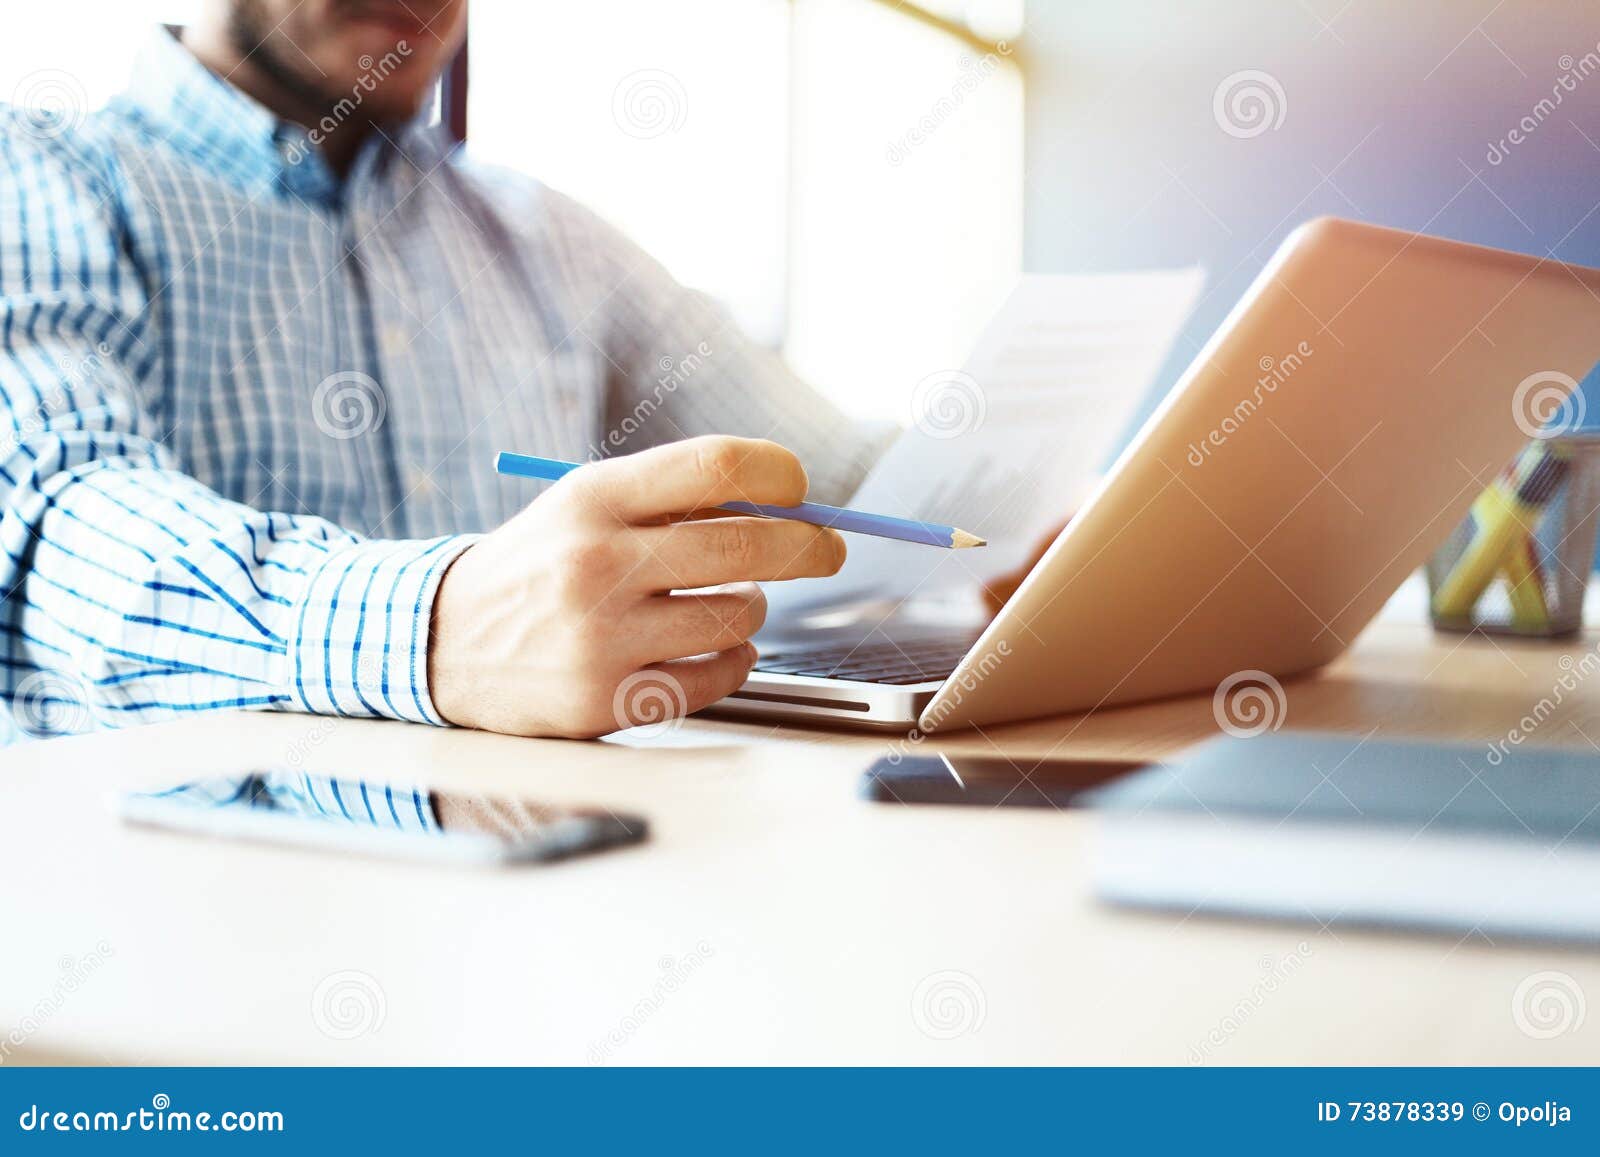 business man working at office with laptop and documents on his desk